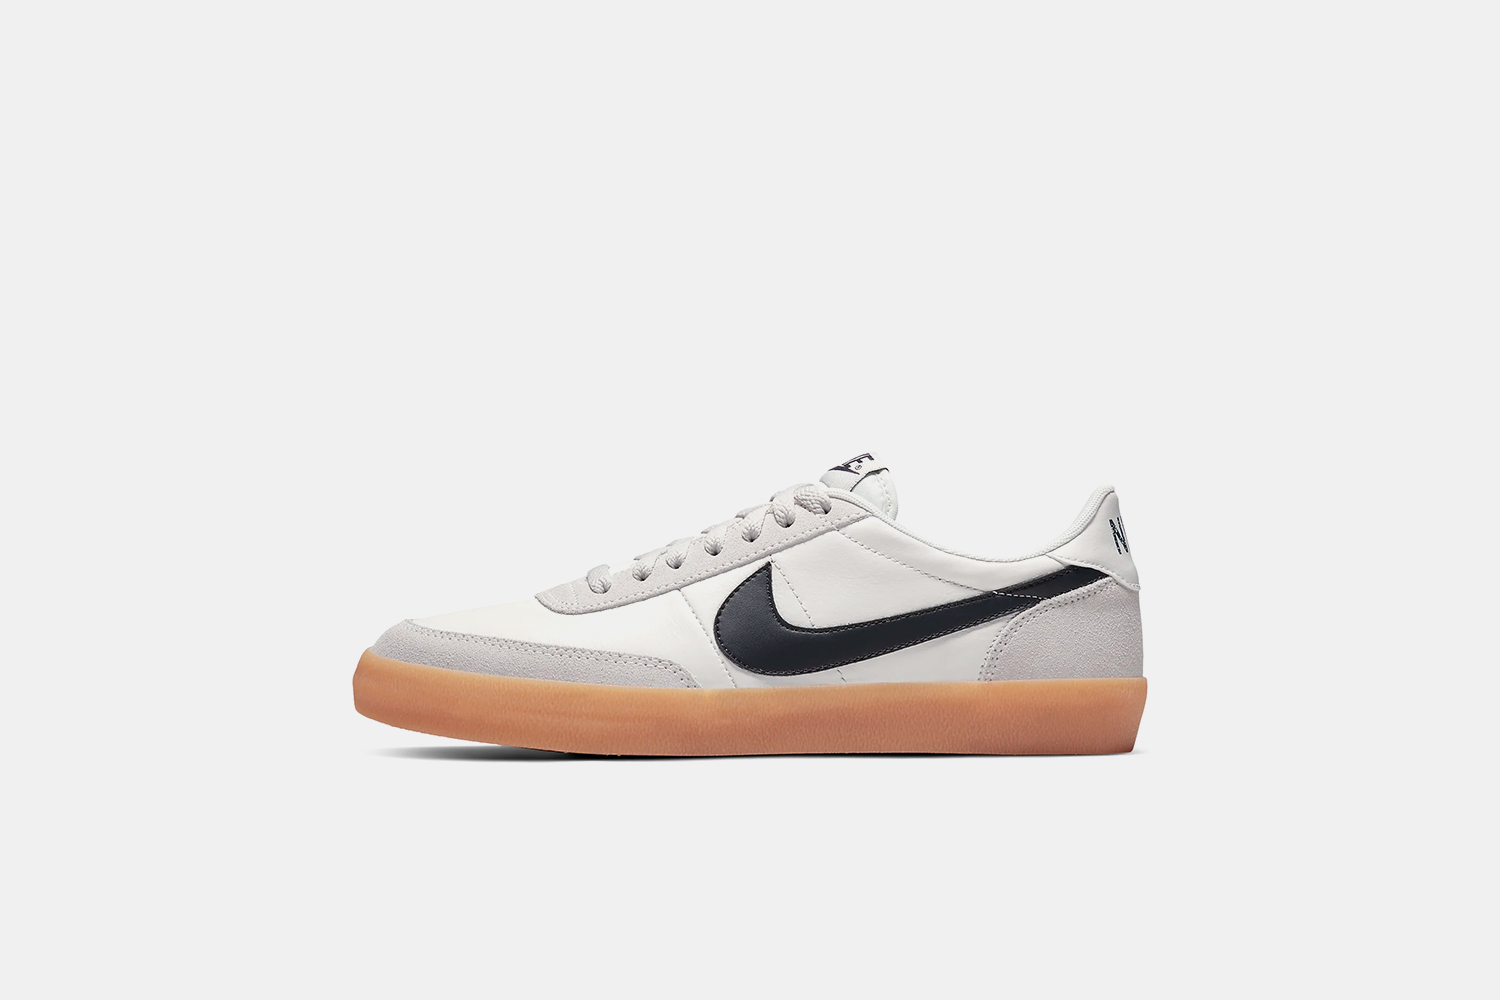 nike shoes cyber monday deal